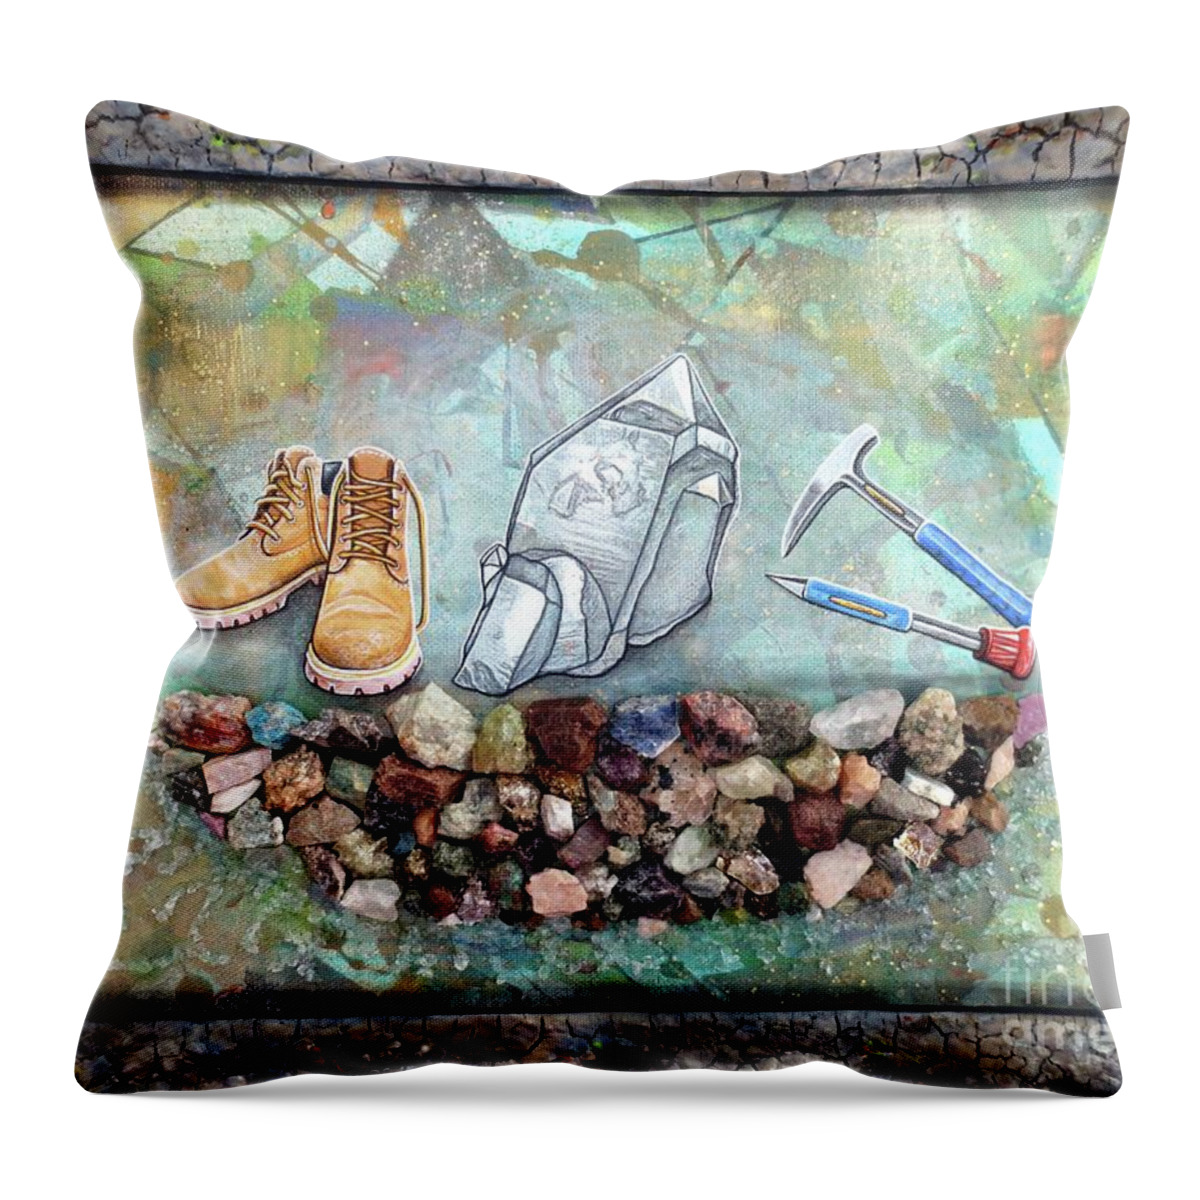 Art Throw Pillow featuring the painting The Magic That Lay Beneath Our Feet by Malinda Prud'homme